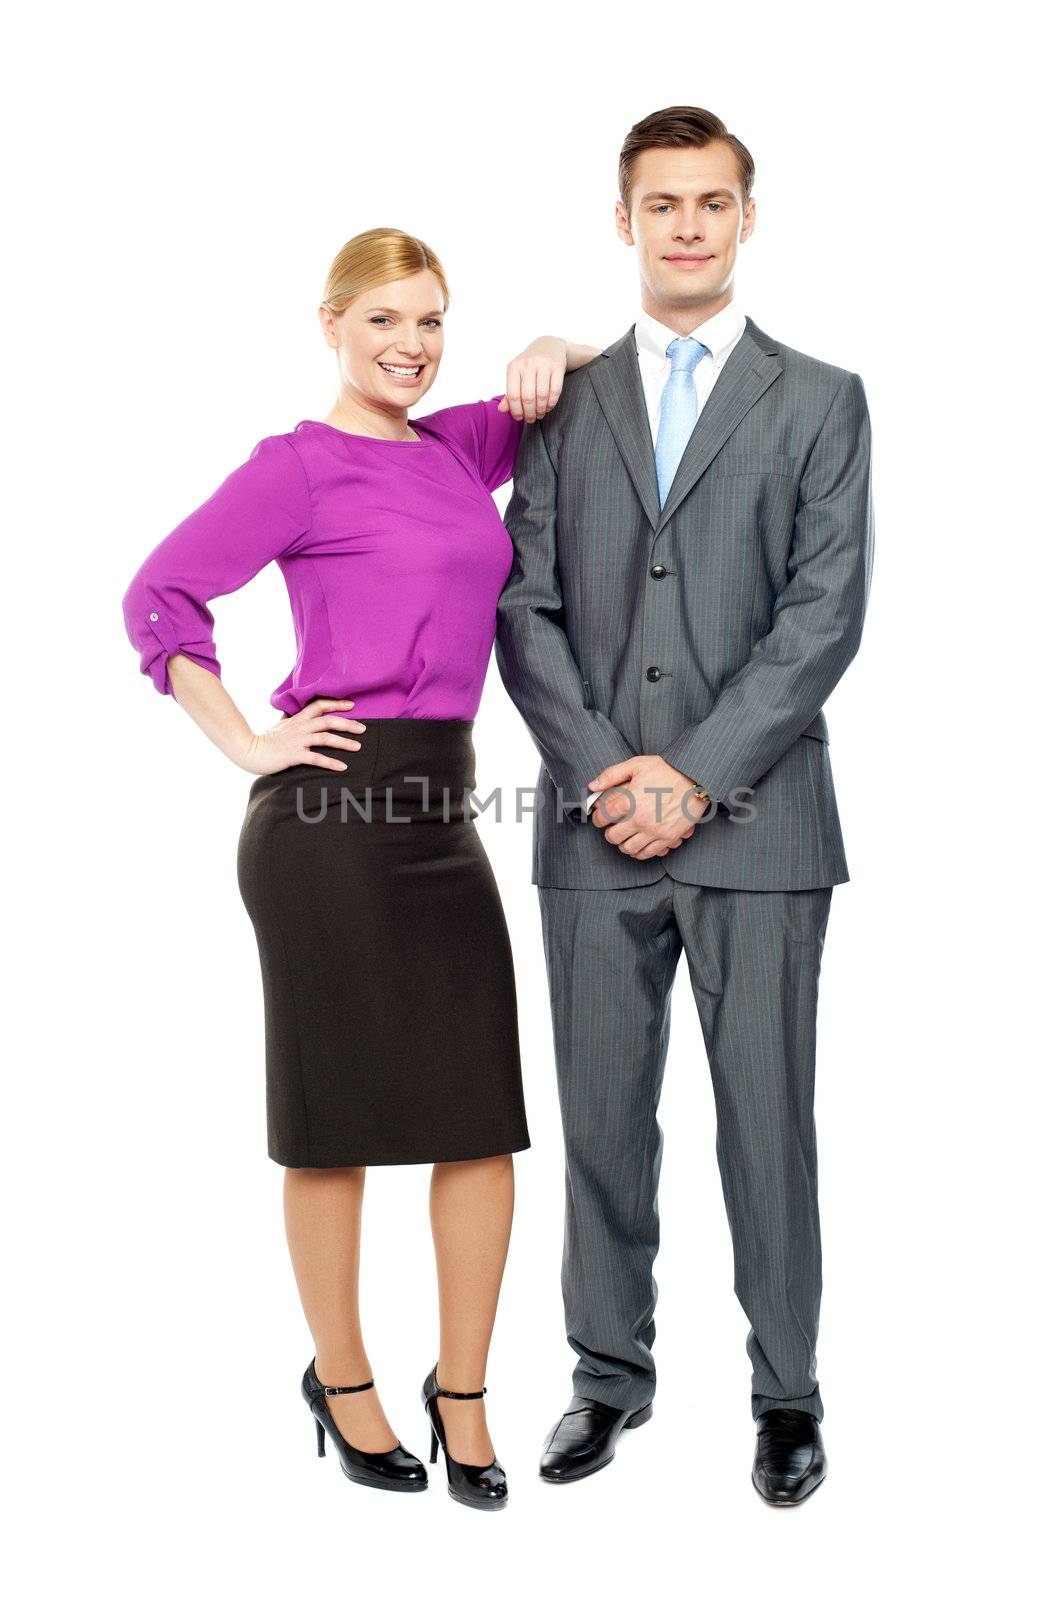 Business team members posing together. Woman resting hands on young businessman